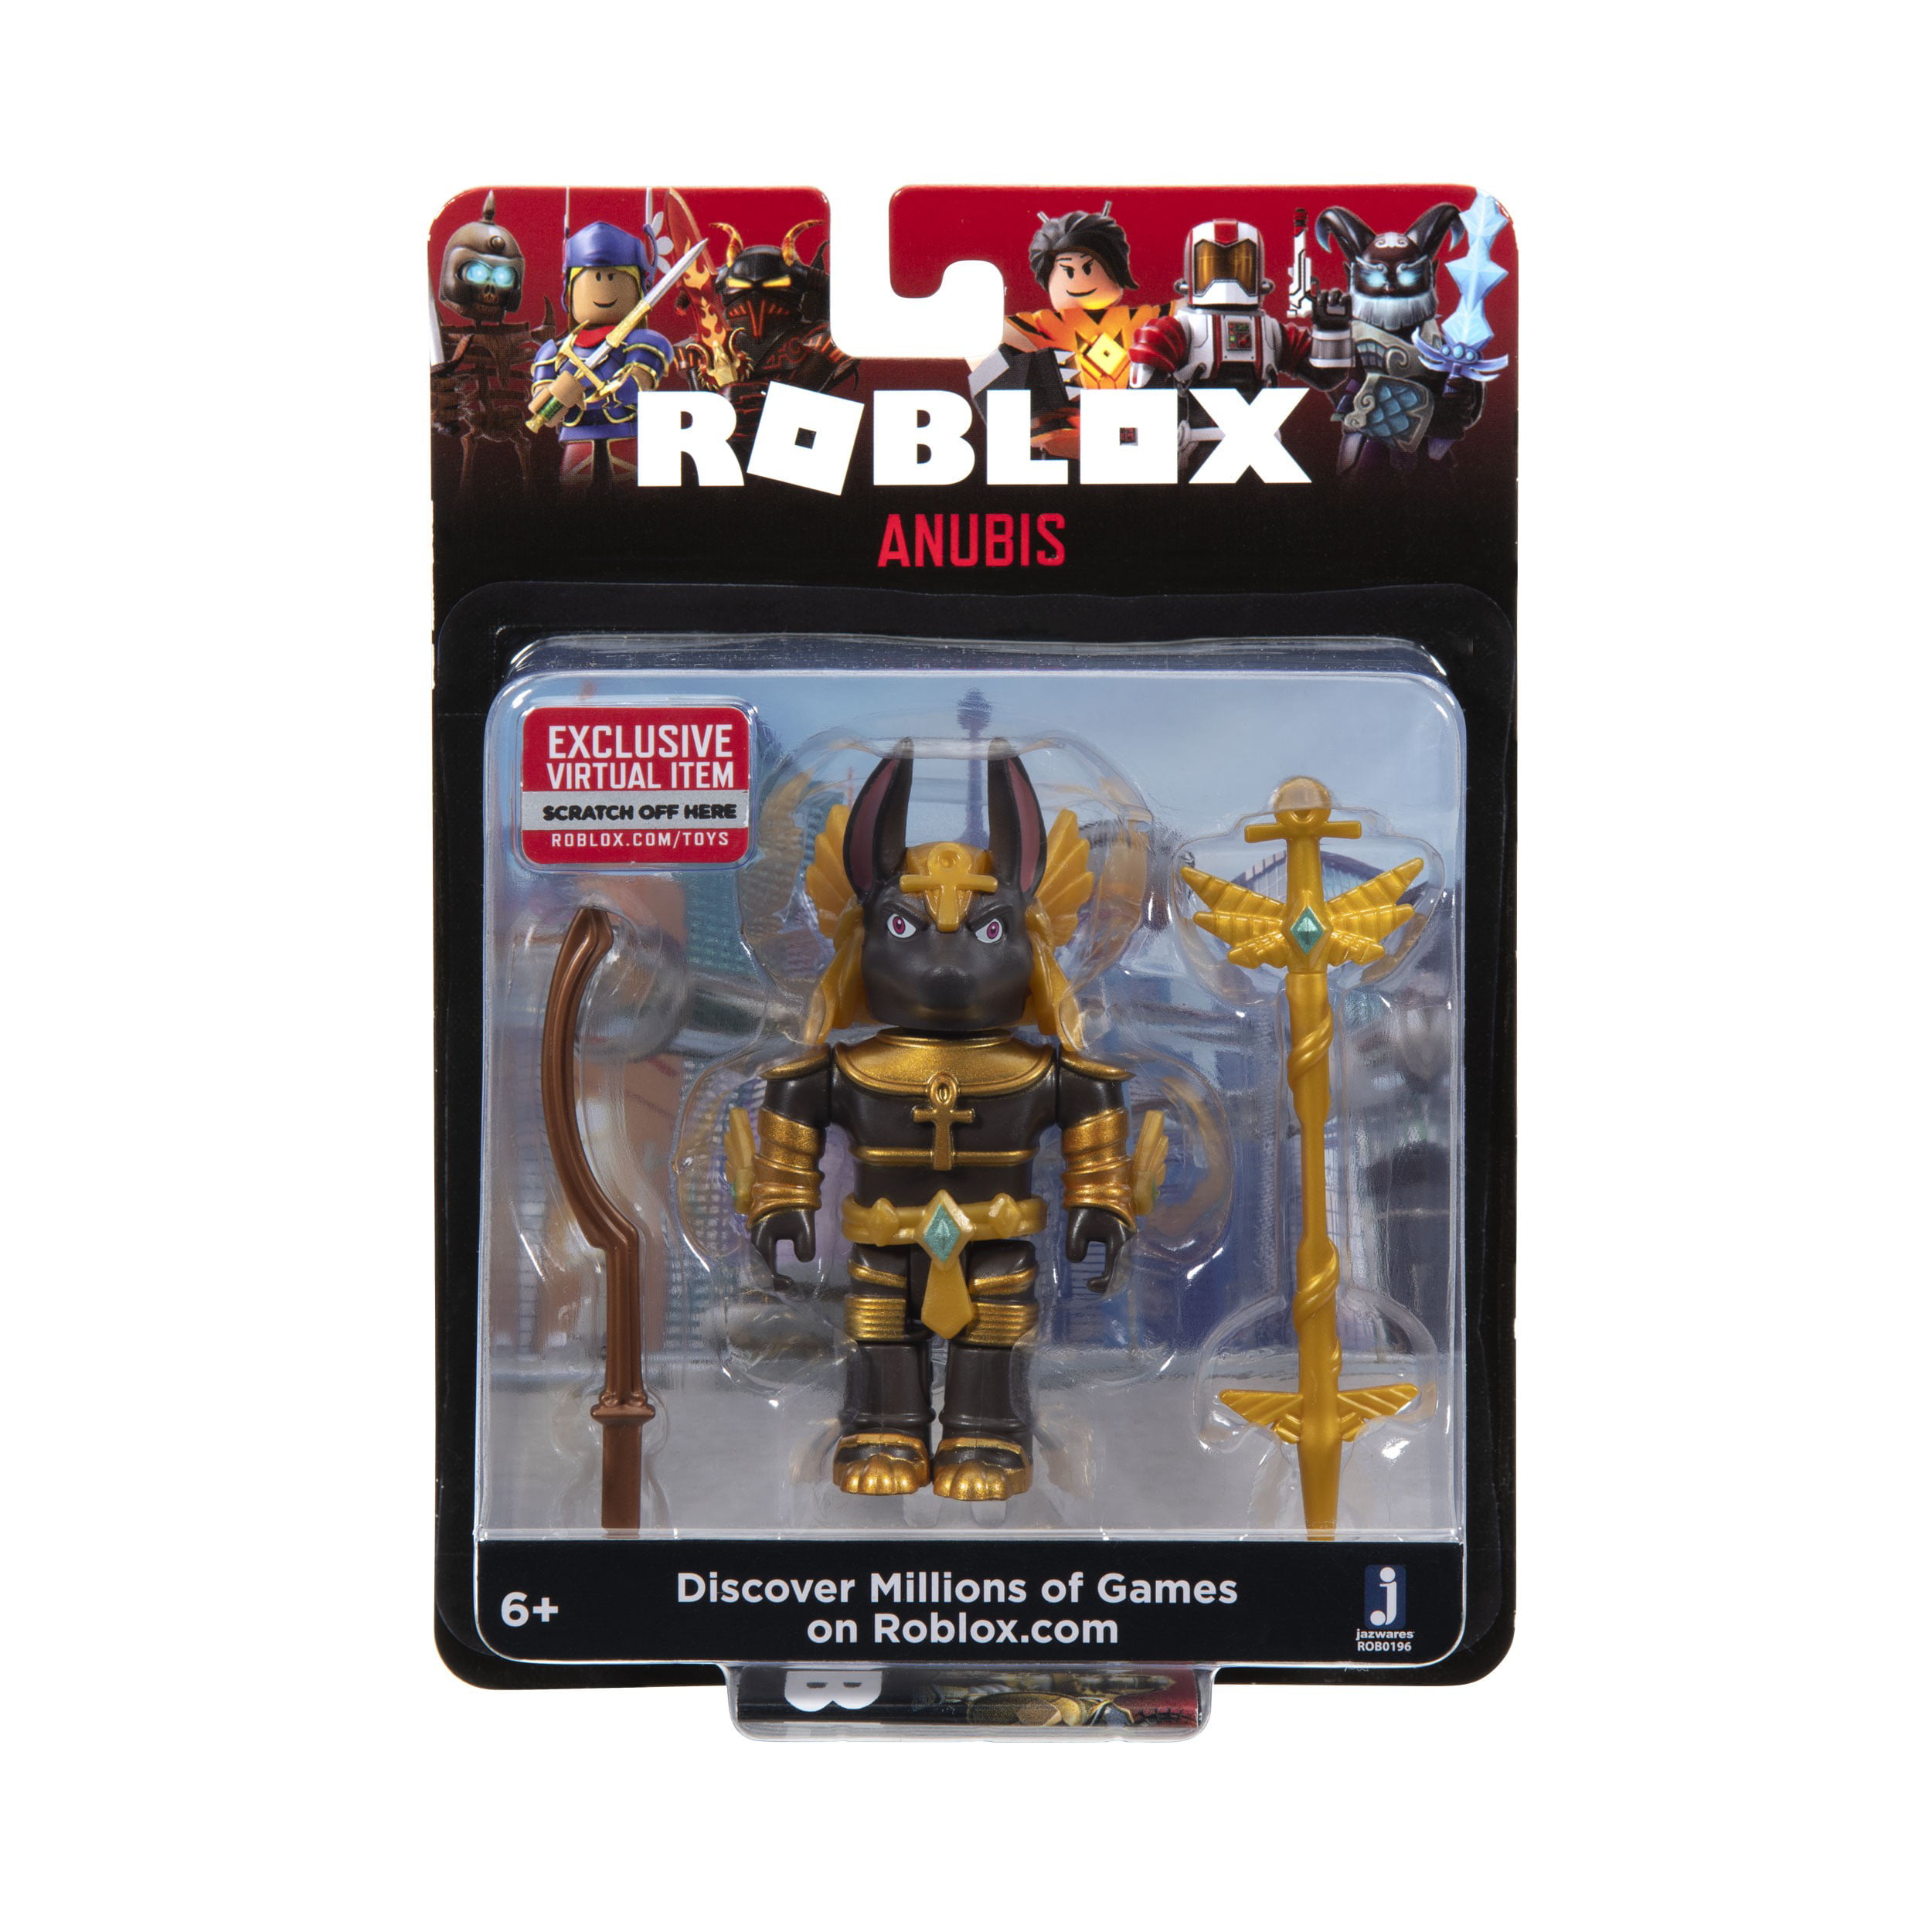 Roblox Action Collection Anubis Figure Pack Includes Exclusive Virtual Item Walmart Com Walmart Com - roblox anubis 3 action figure jazwares toywiz